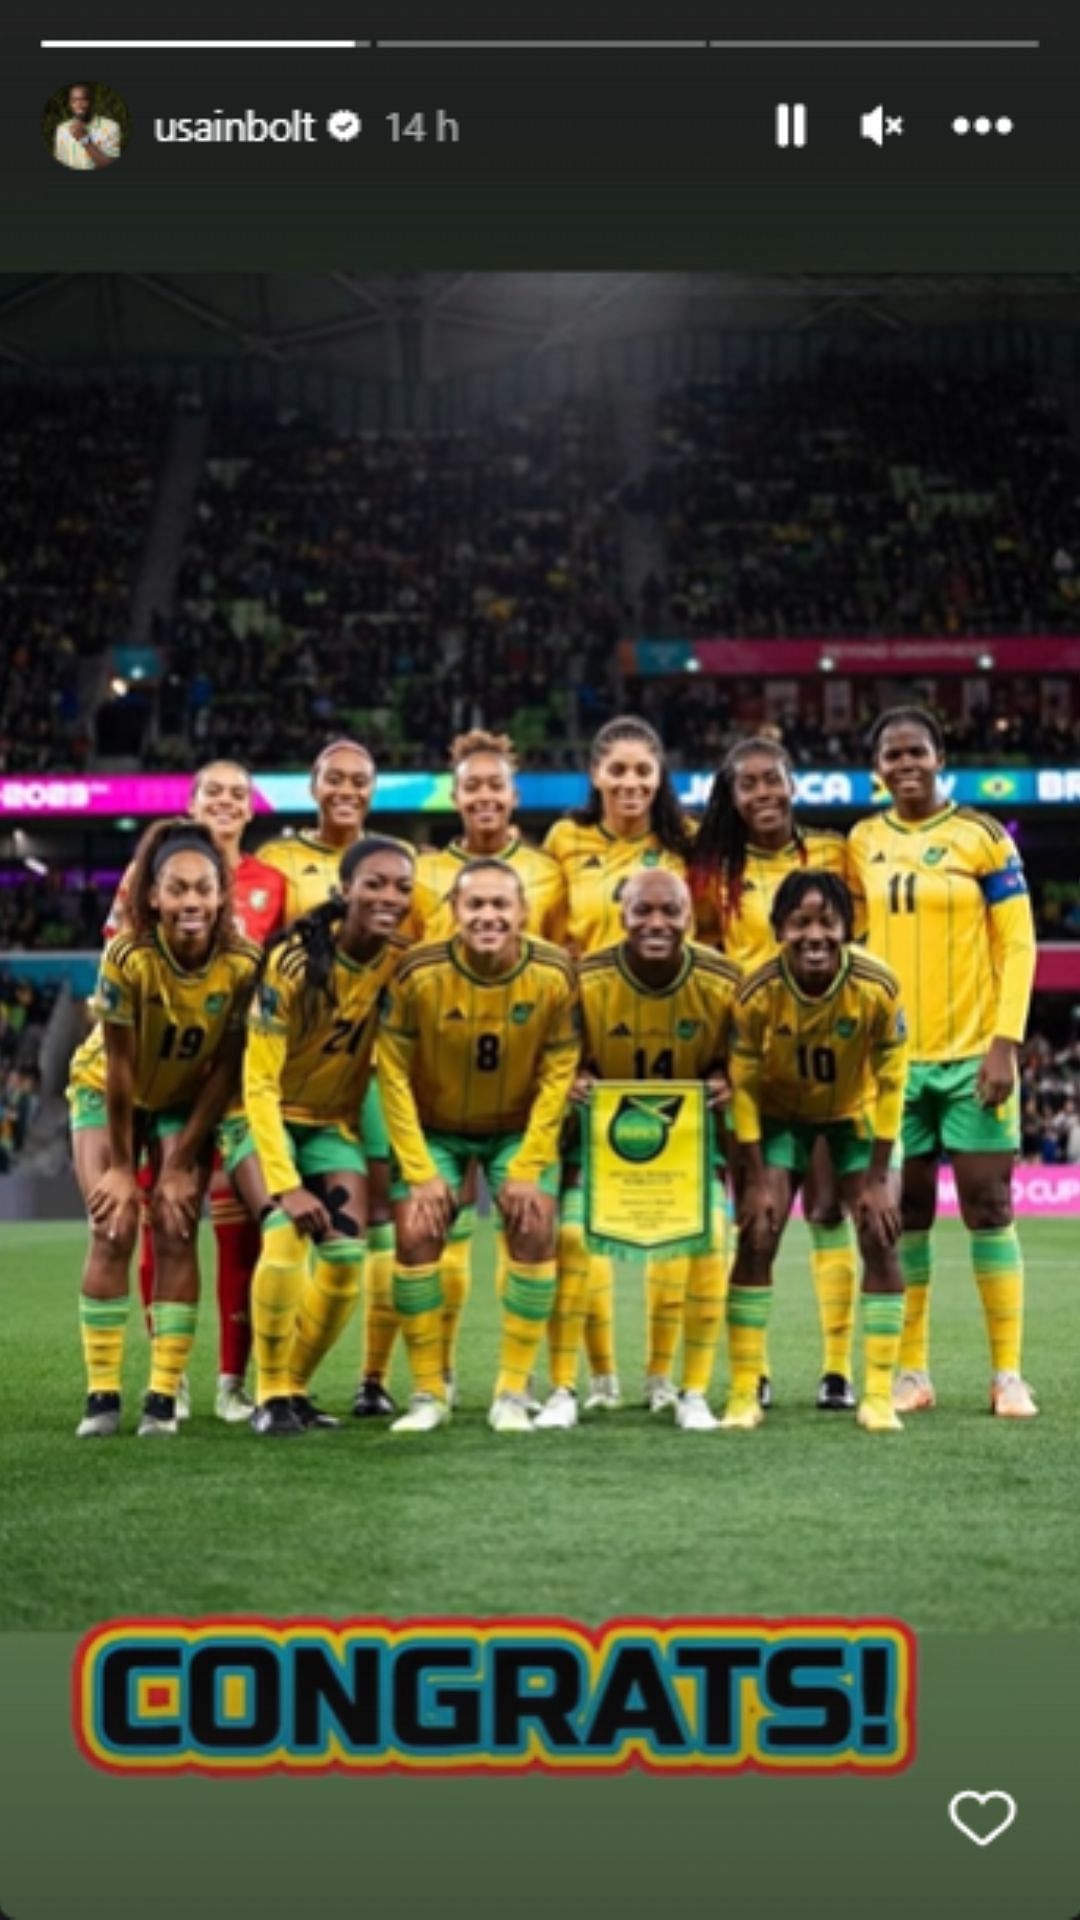 Usain Bolt posted a picture of the Women&#039;s Football team congratulating them.